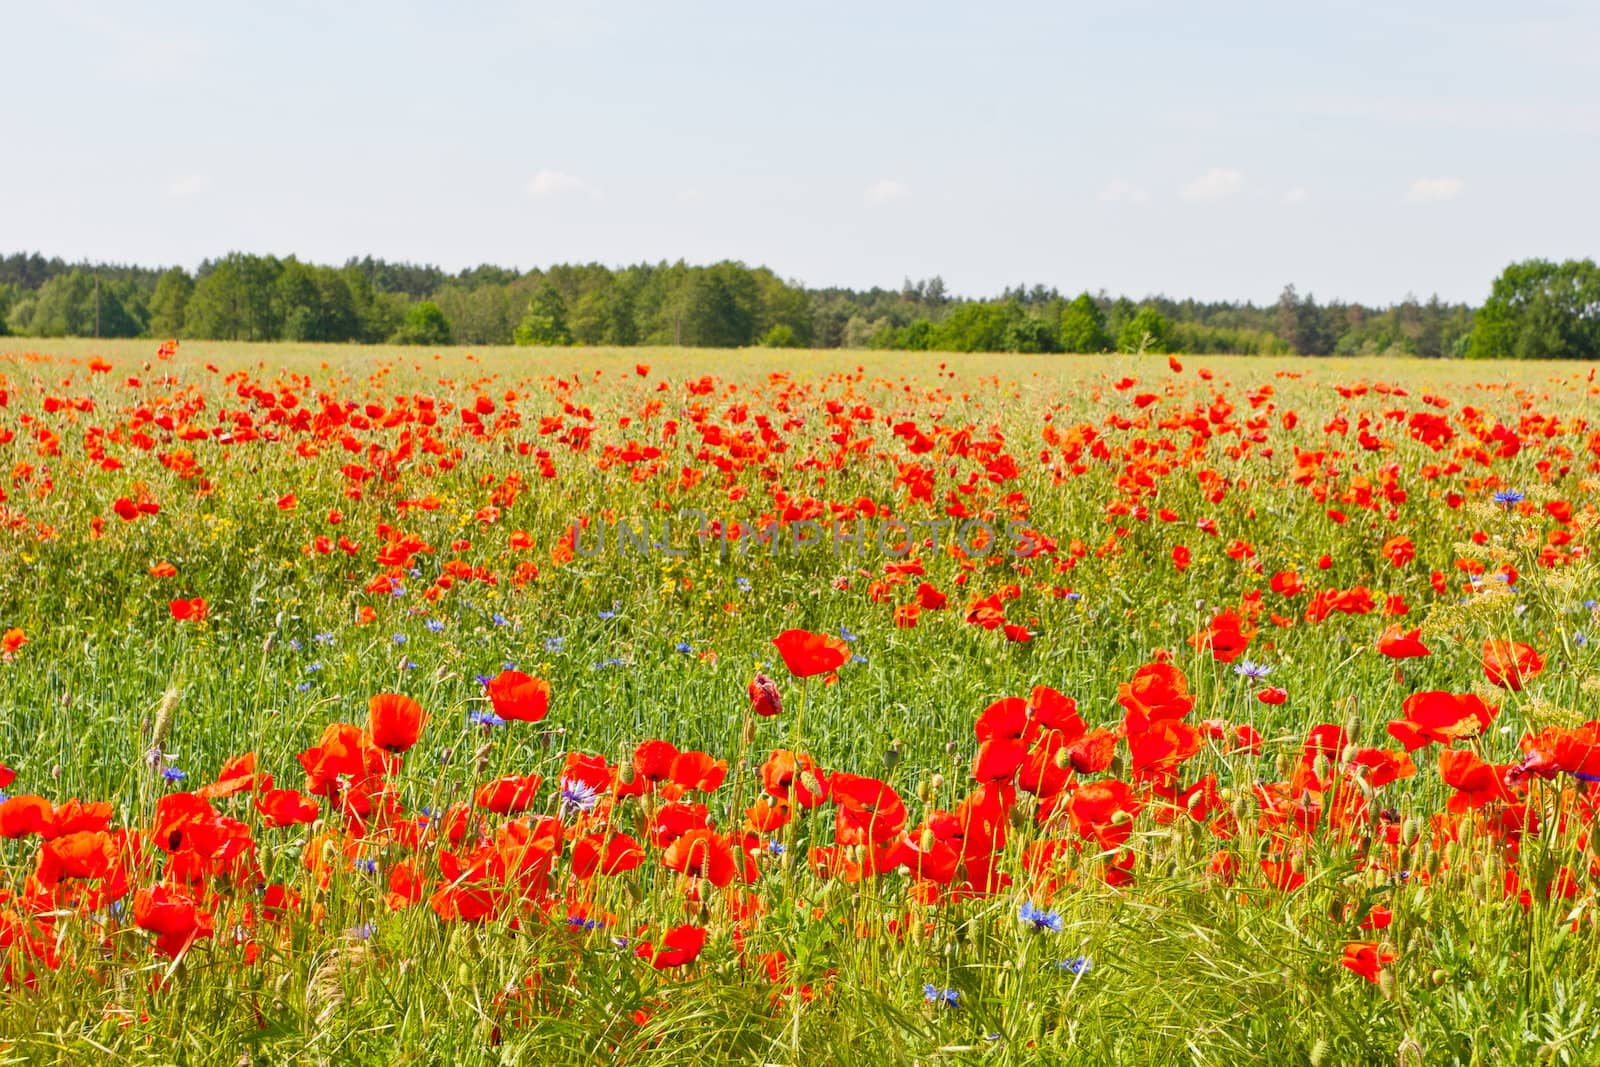 A poppy is any of a number of colorful flowers, typically with one per stem, belonging to the poppy family.